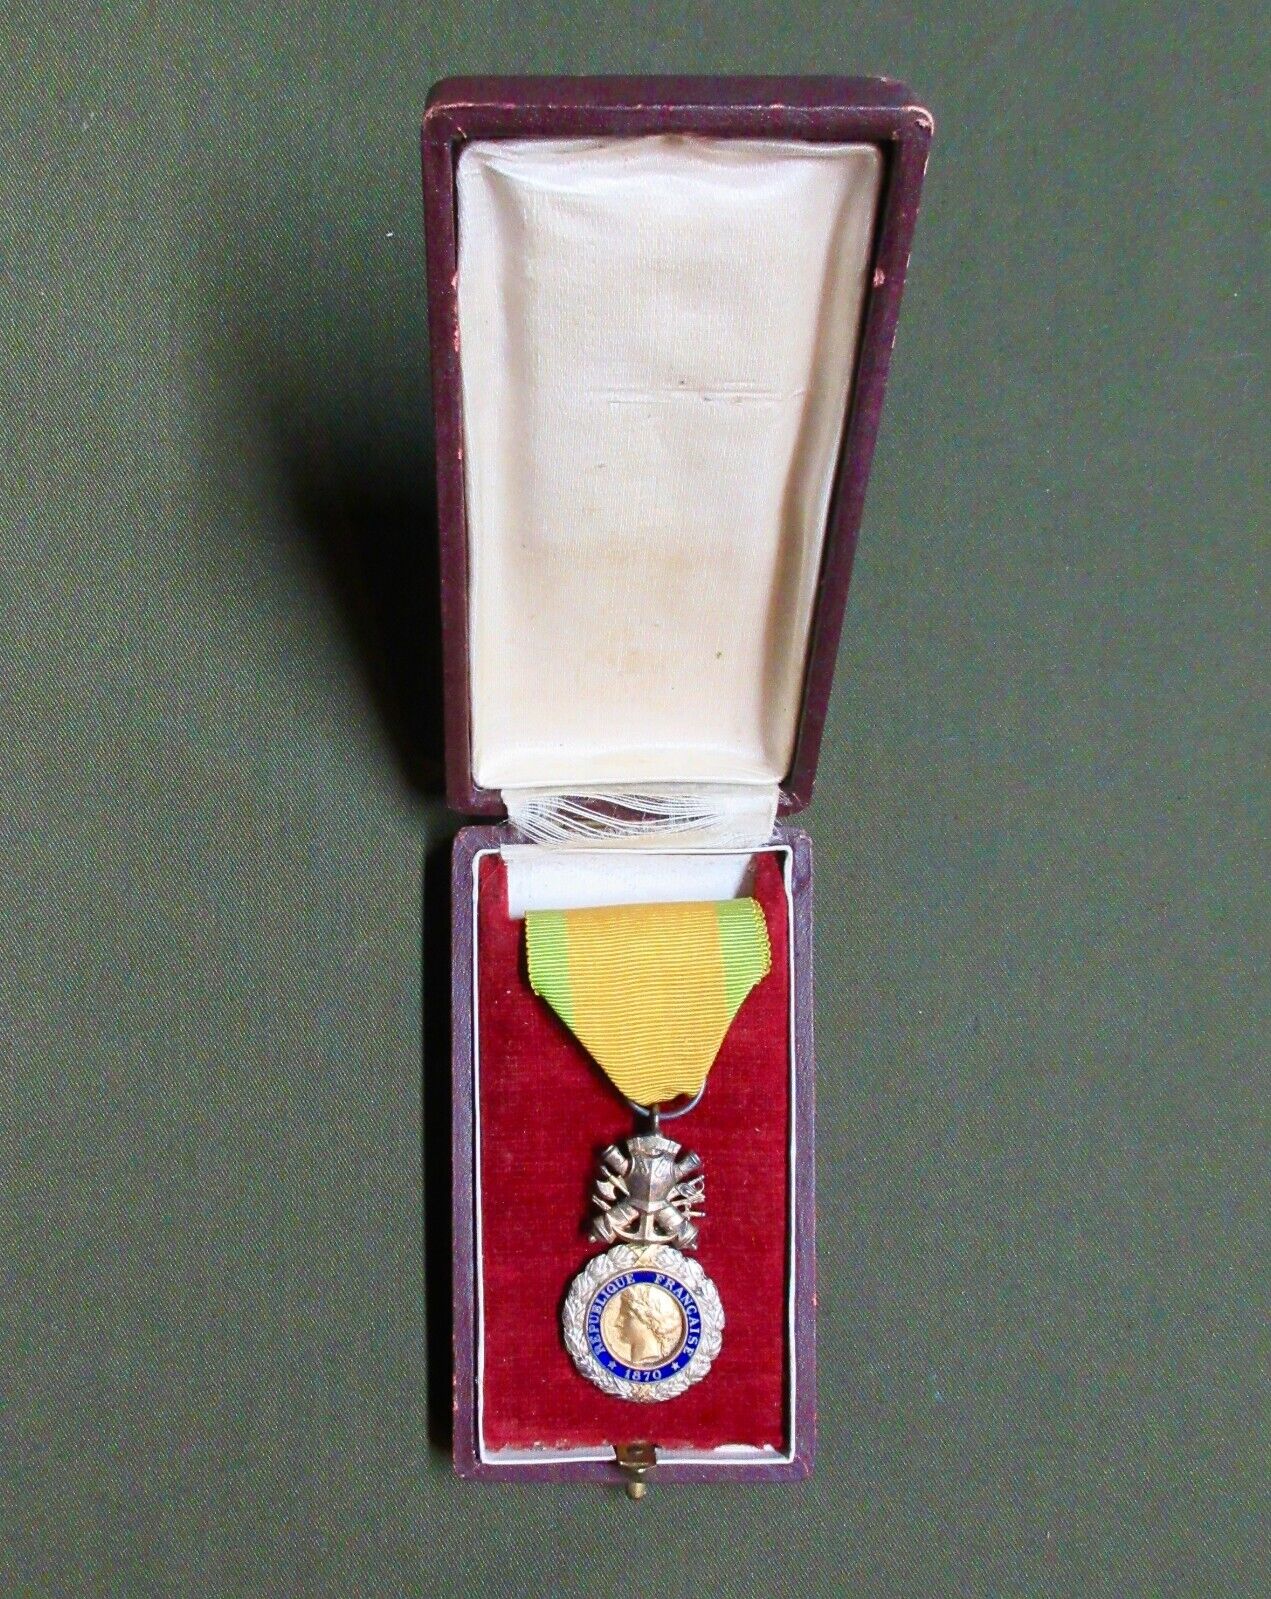 Boxed French Médaille Militaire - 3rd Republic 1870-1940